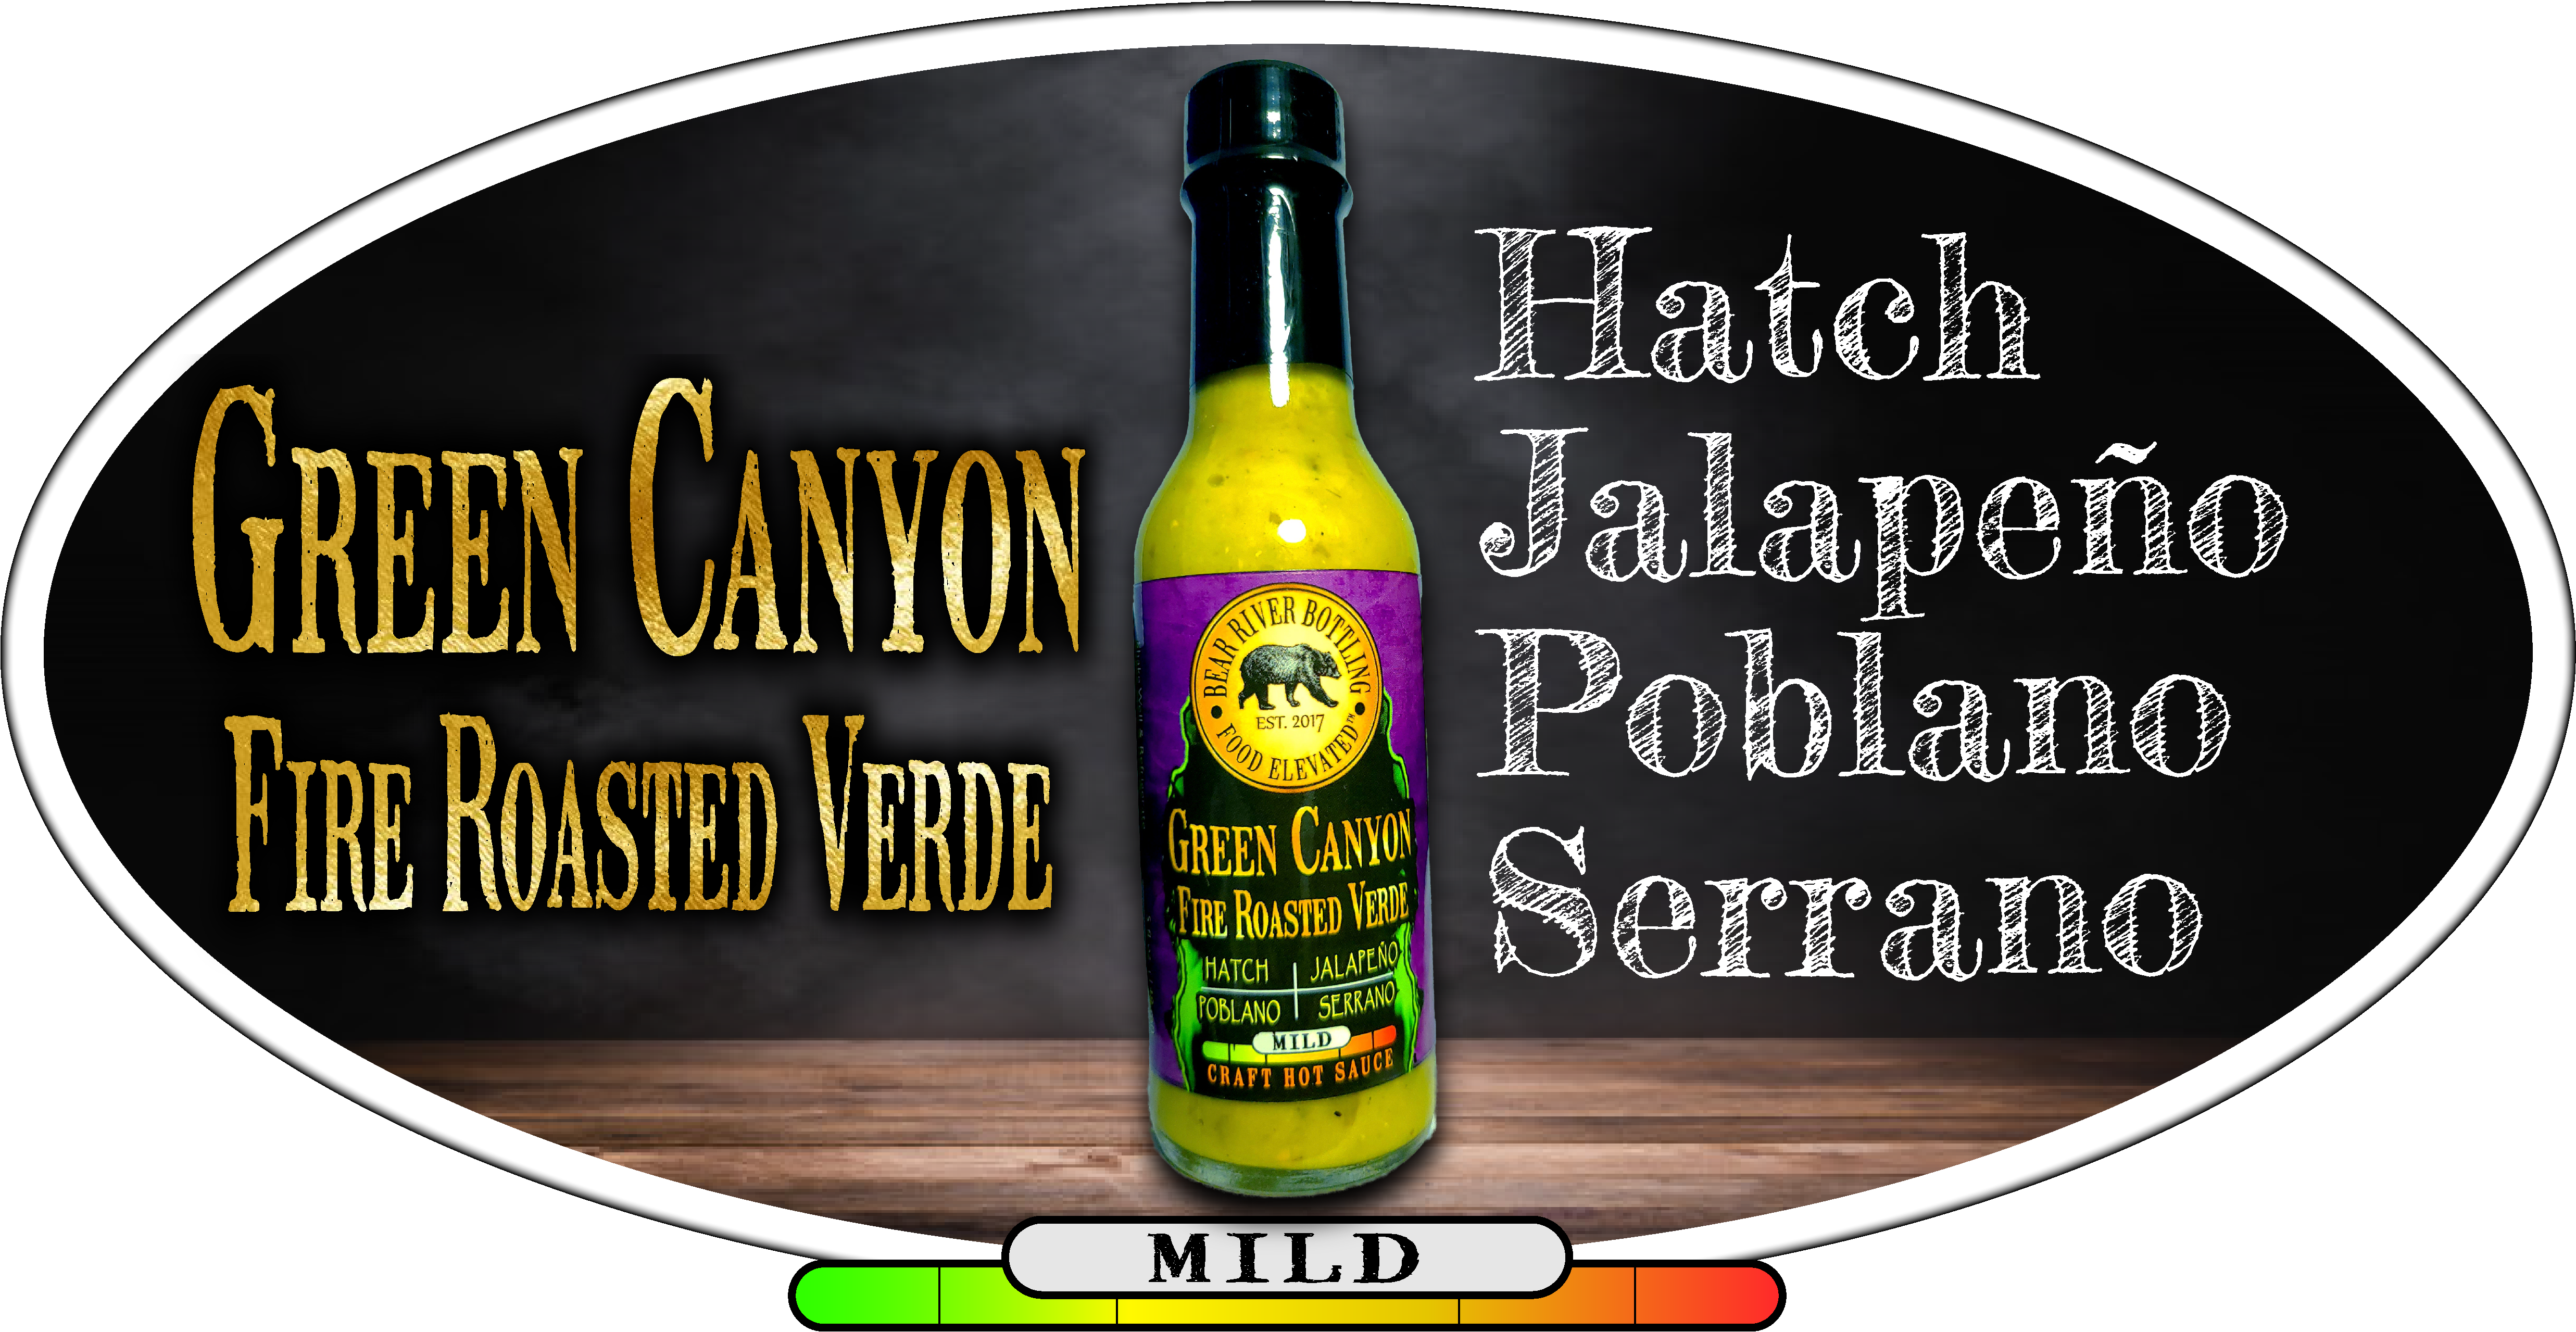 Green Canyon Fire Roasted Verde